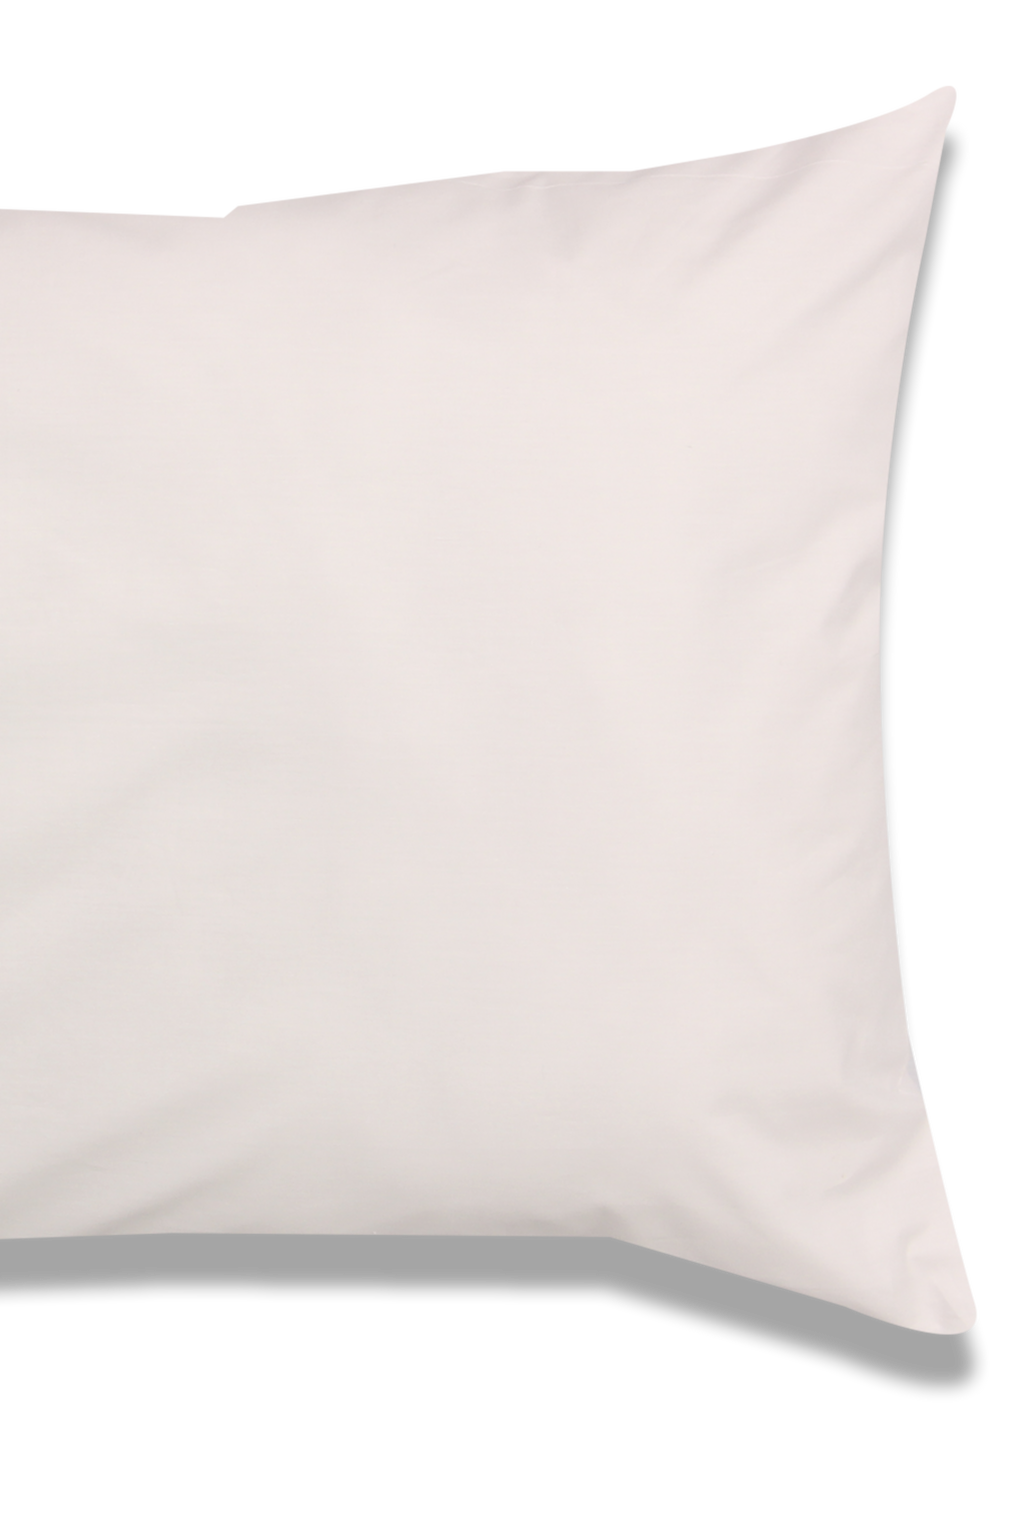 100% Cotton 200 Thread Count 2 Pack King Pillowcases